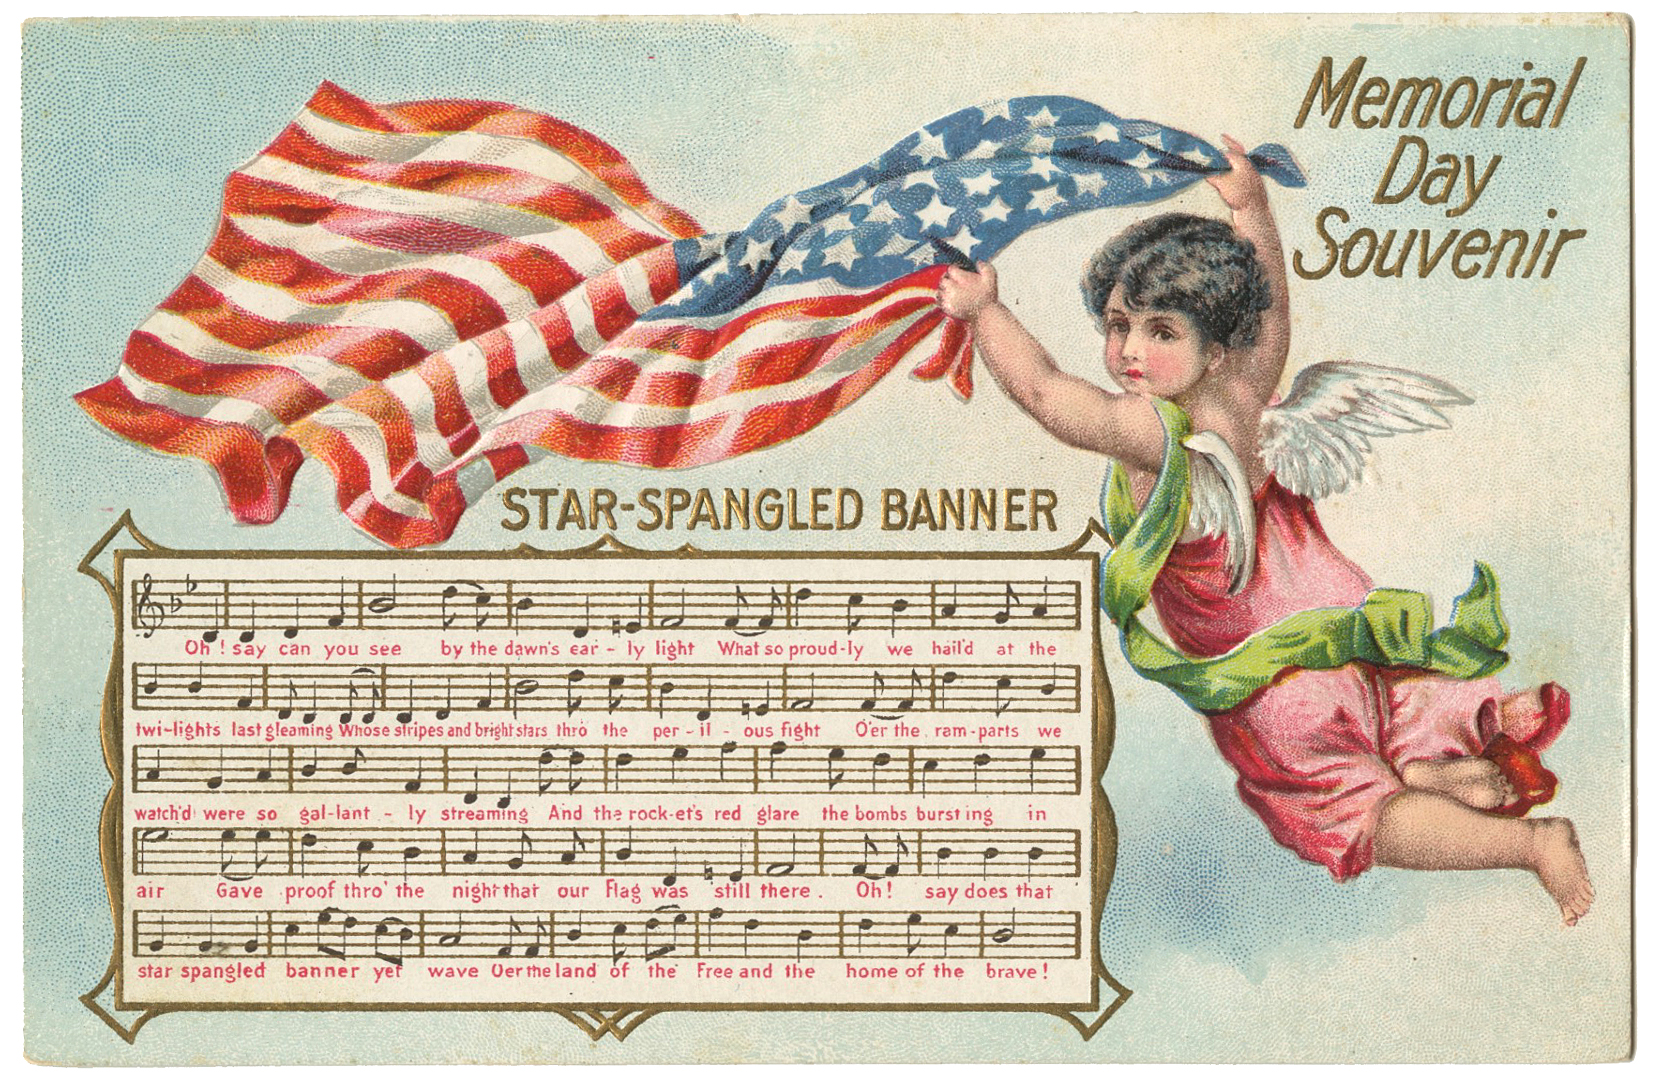 Vintage Memorial Day Image with Song